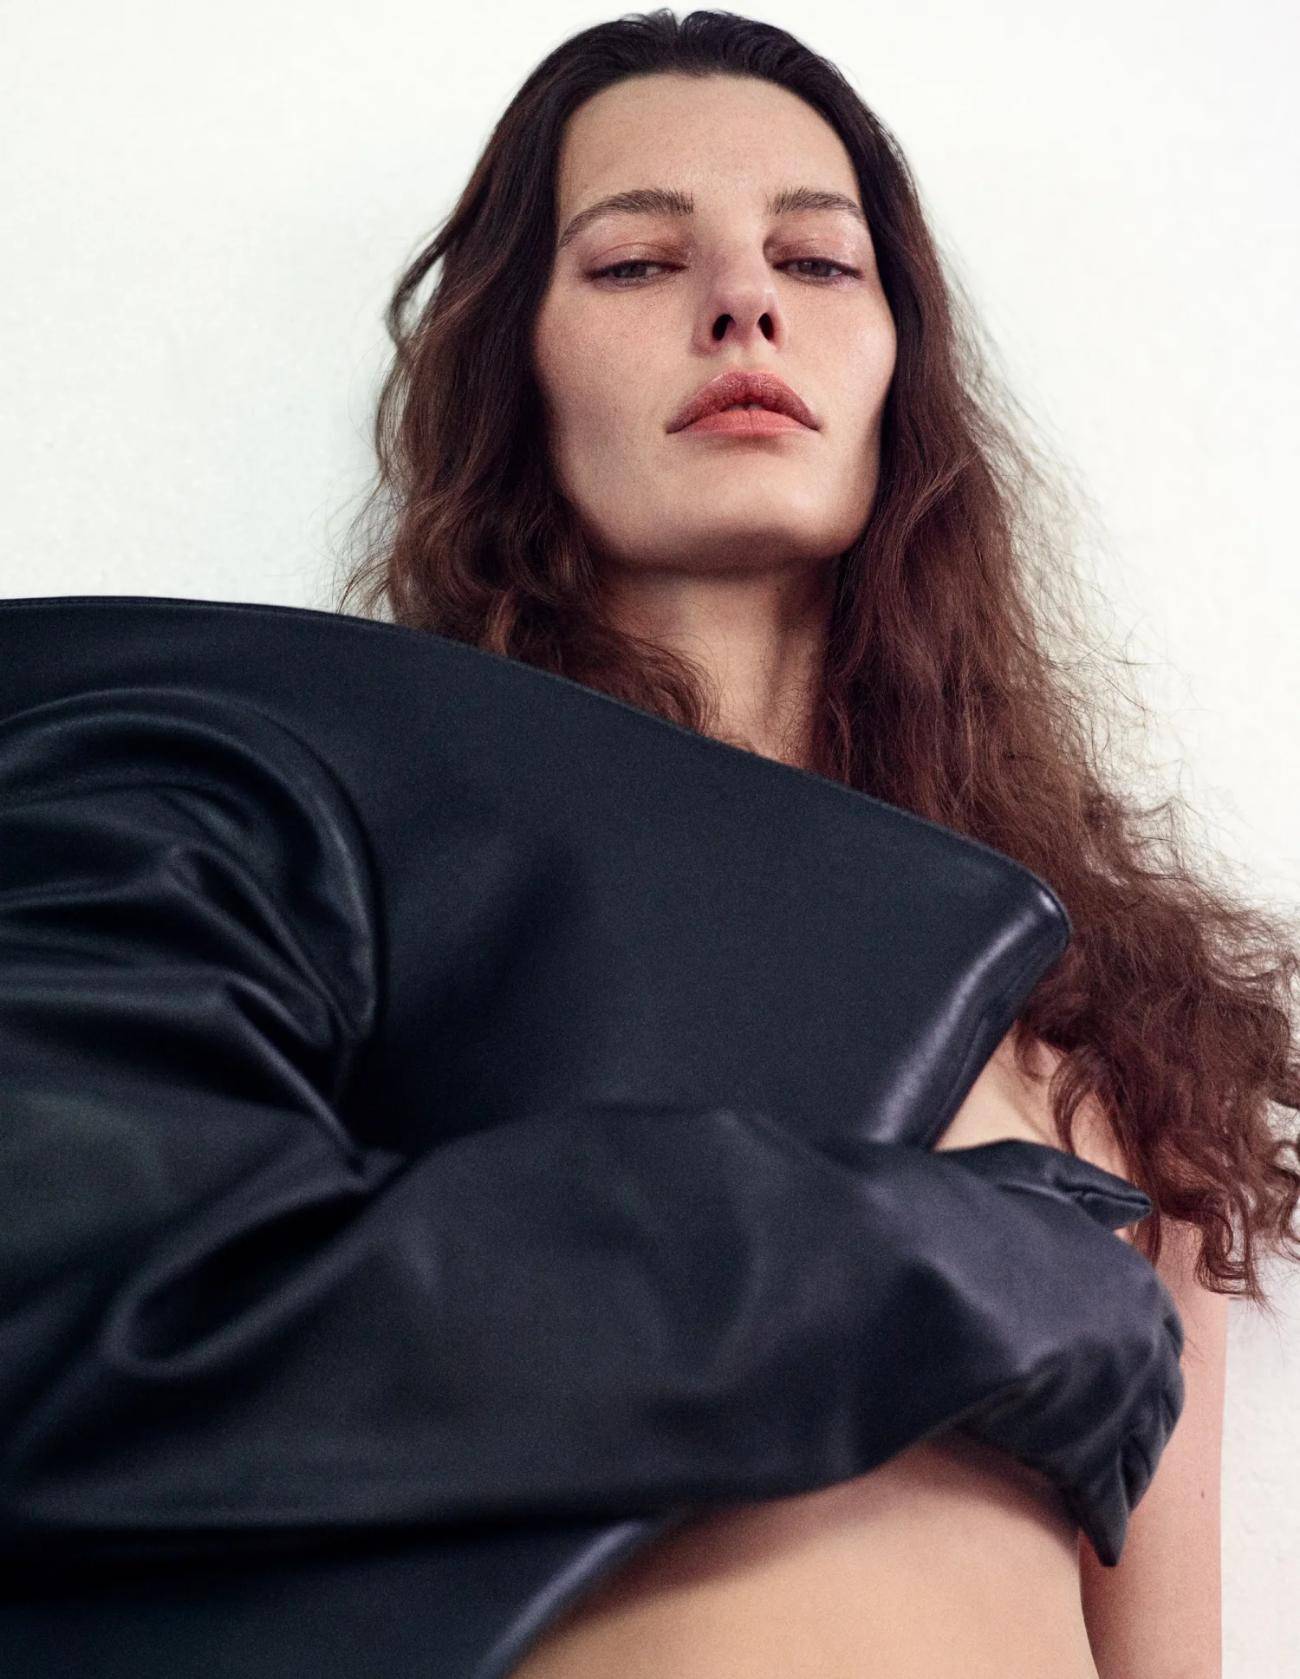 Amanda Murphy in Balenciaga Black Leather Bag with a Glove for Re-Edition Magazine Spring-Summer 2023 Fashion Editorial